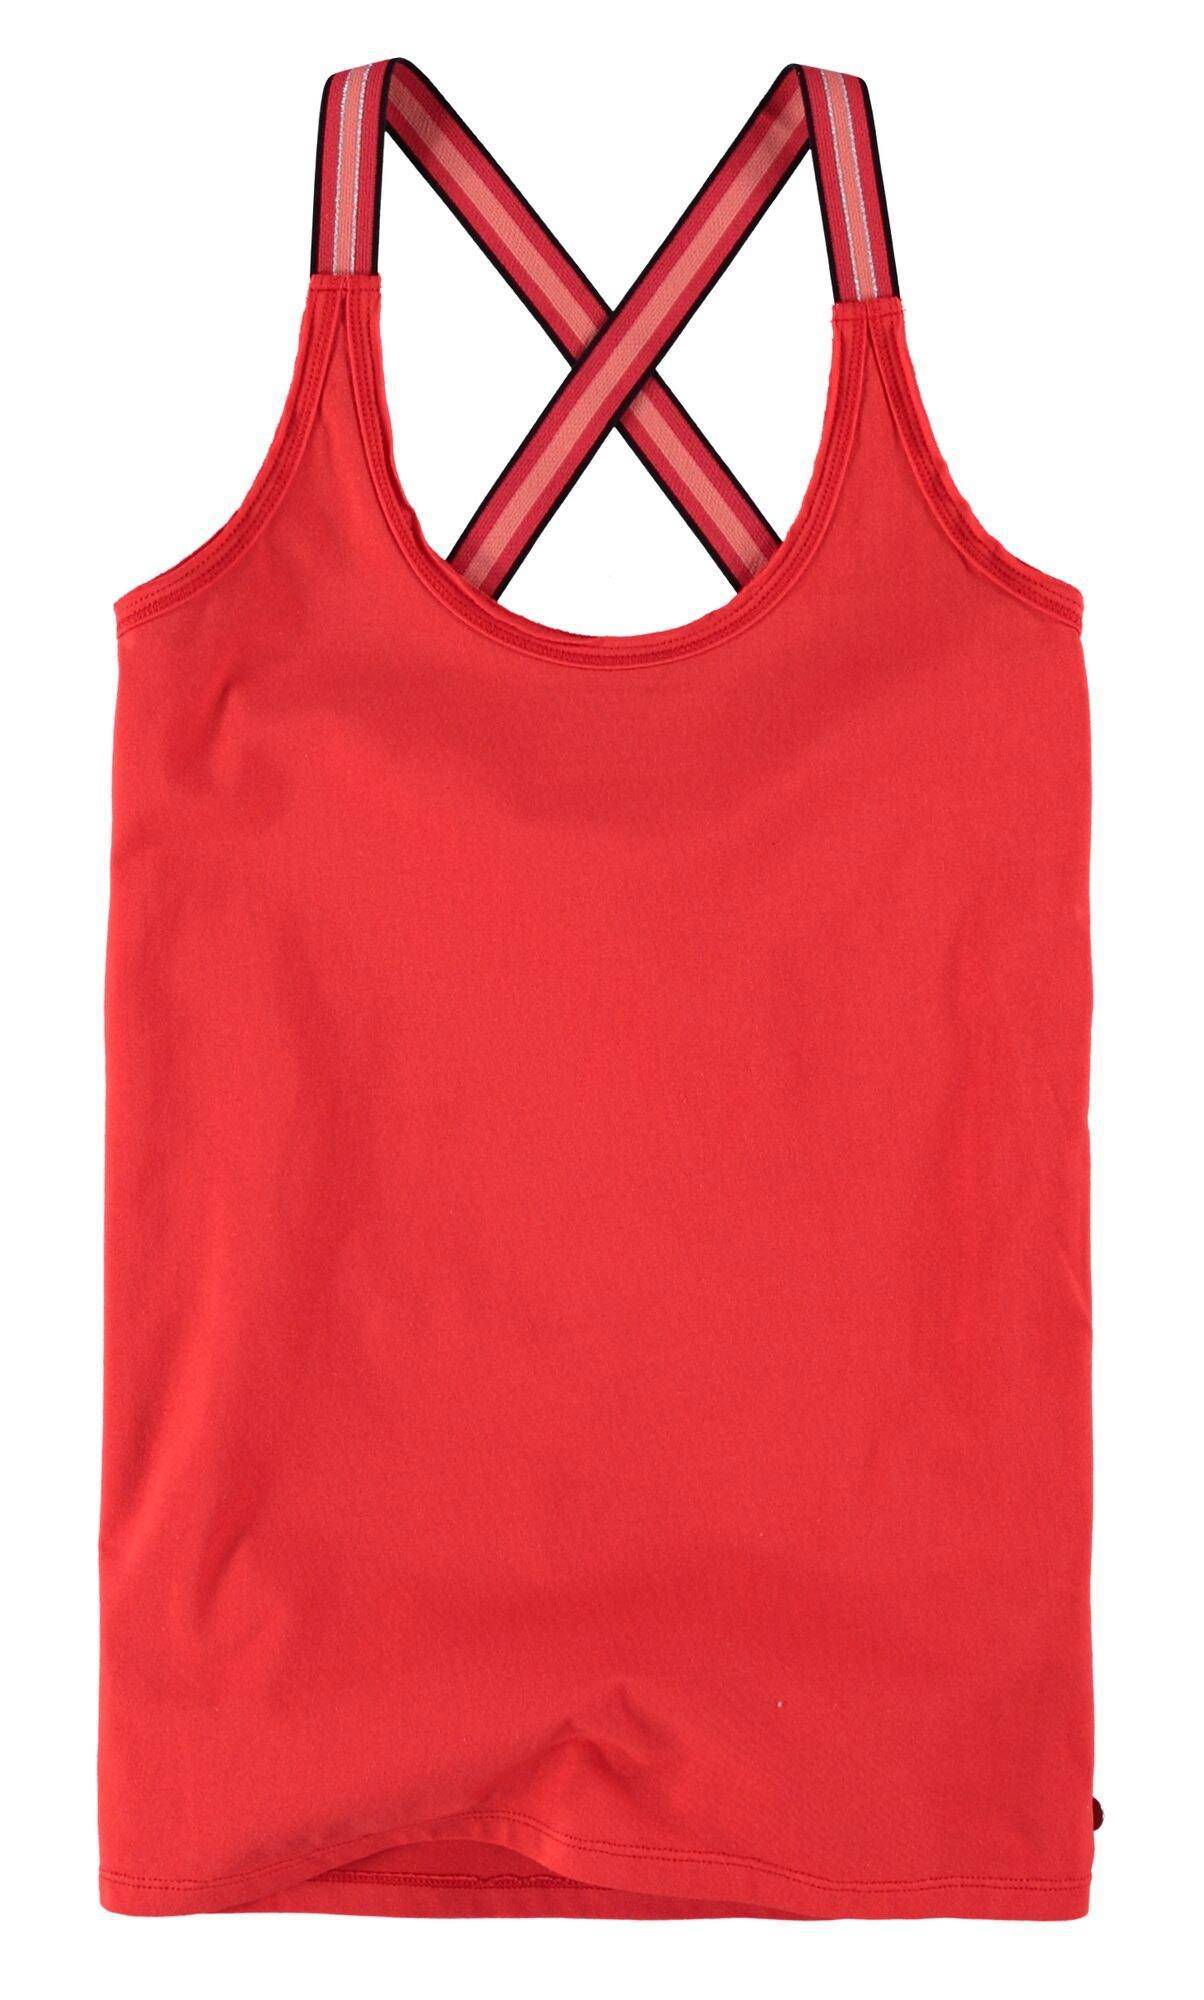 Poppy Red Sleeveless Garcia Top - Your Style Your Story